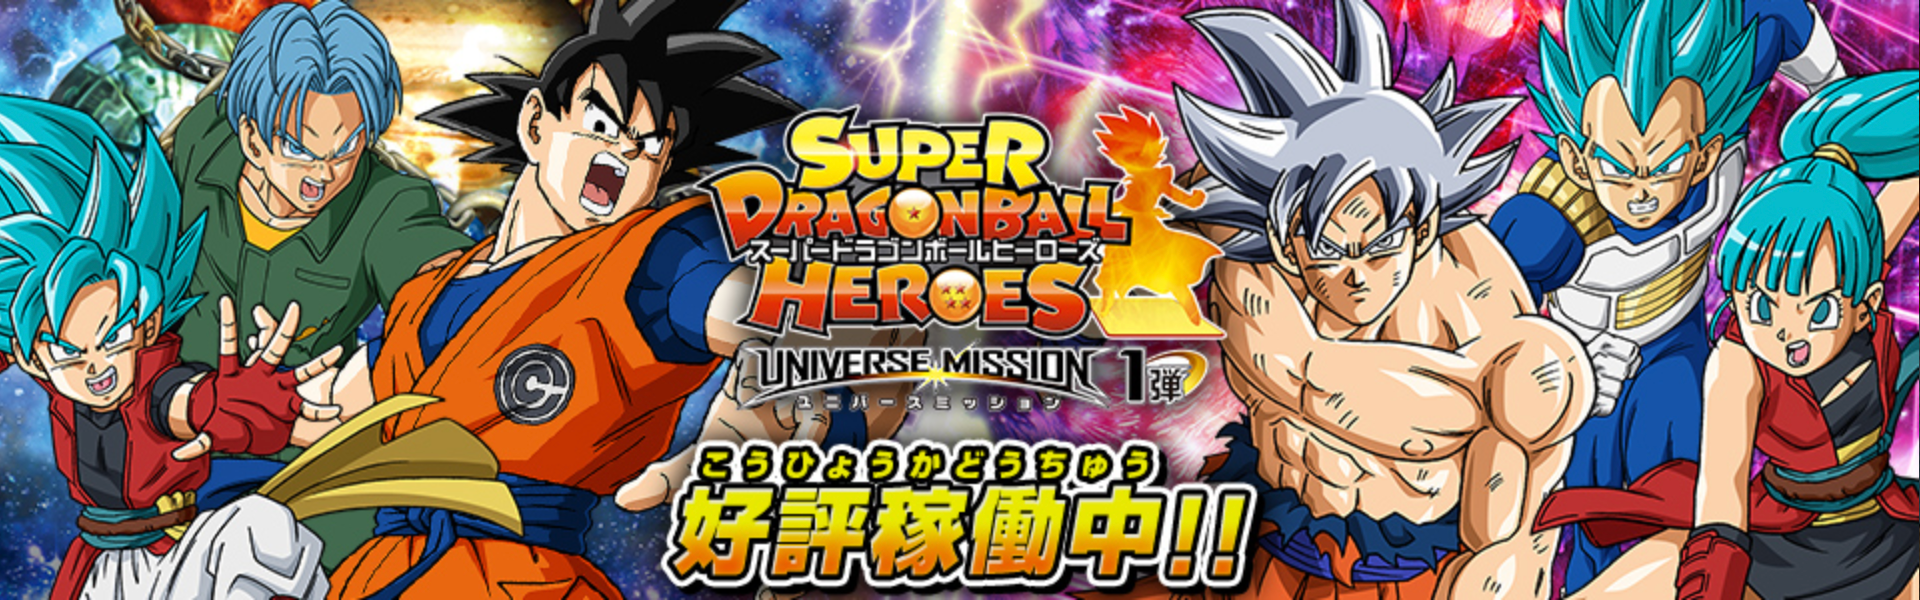 SUPER DRAGON BALL HEROES UNIVERSE MISSION 1 (SDBH UM1) cards list